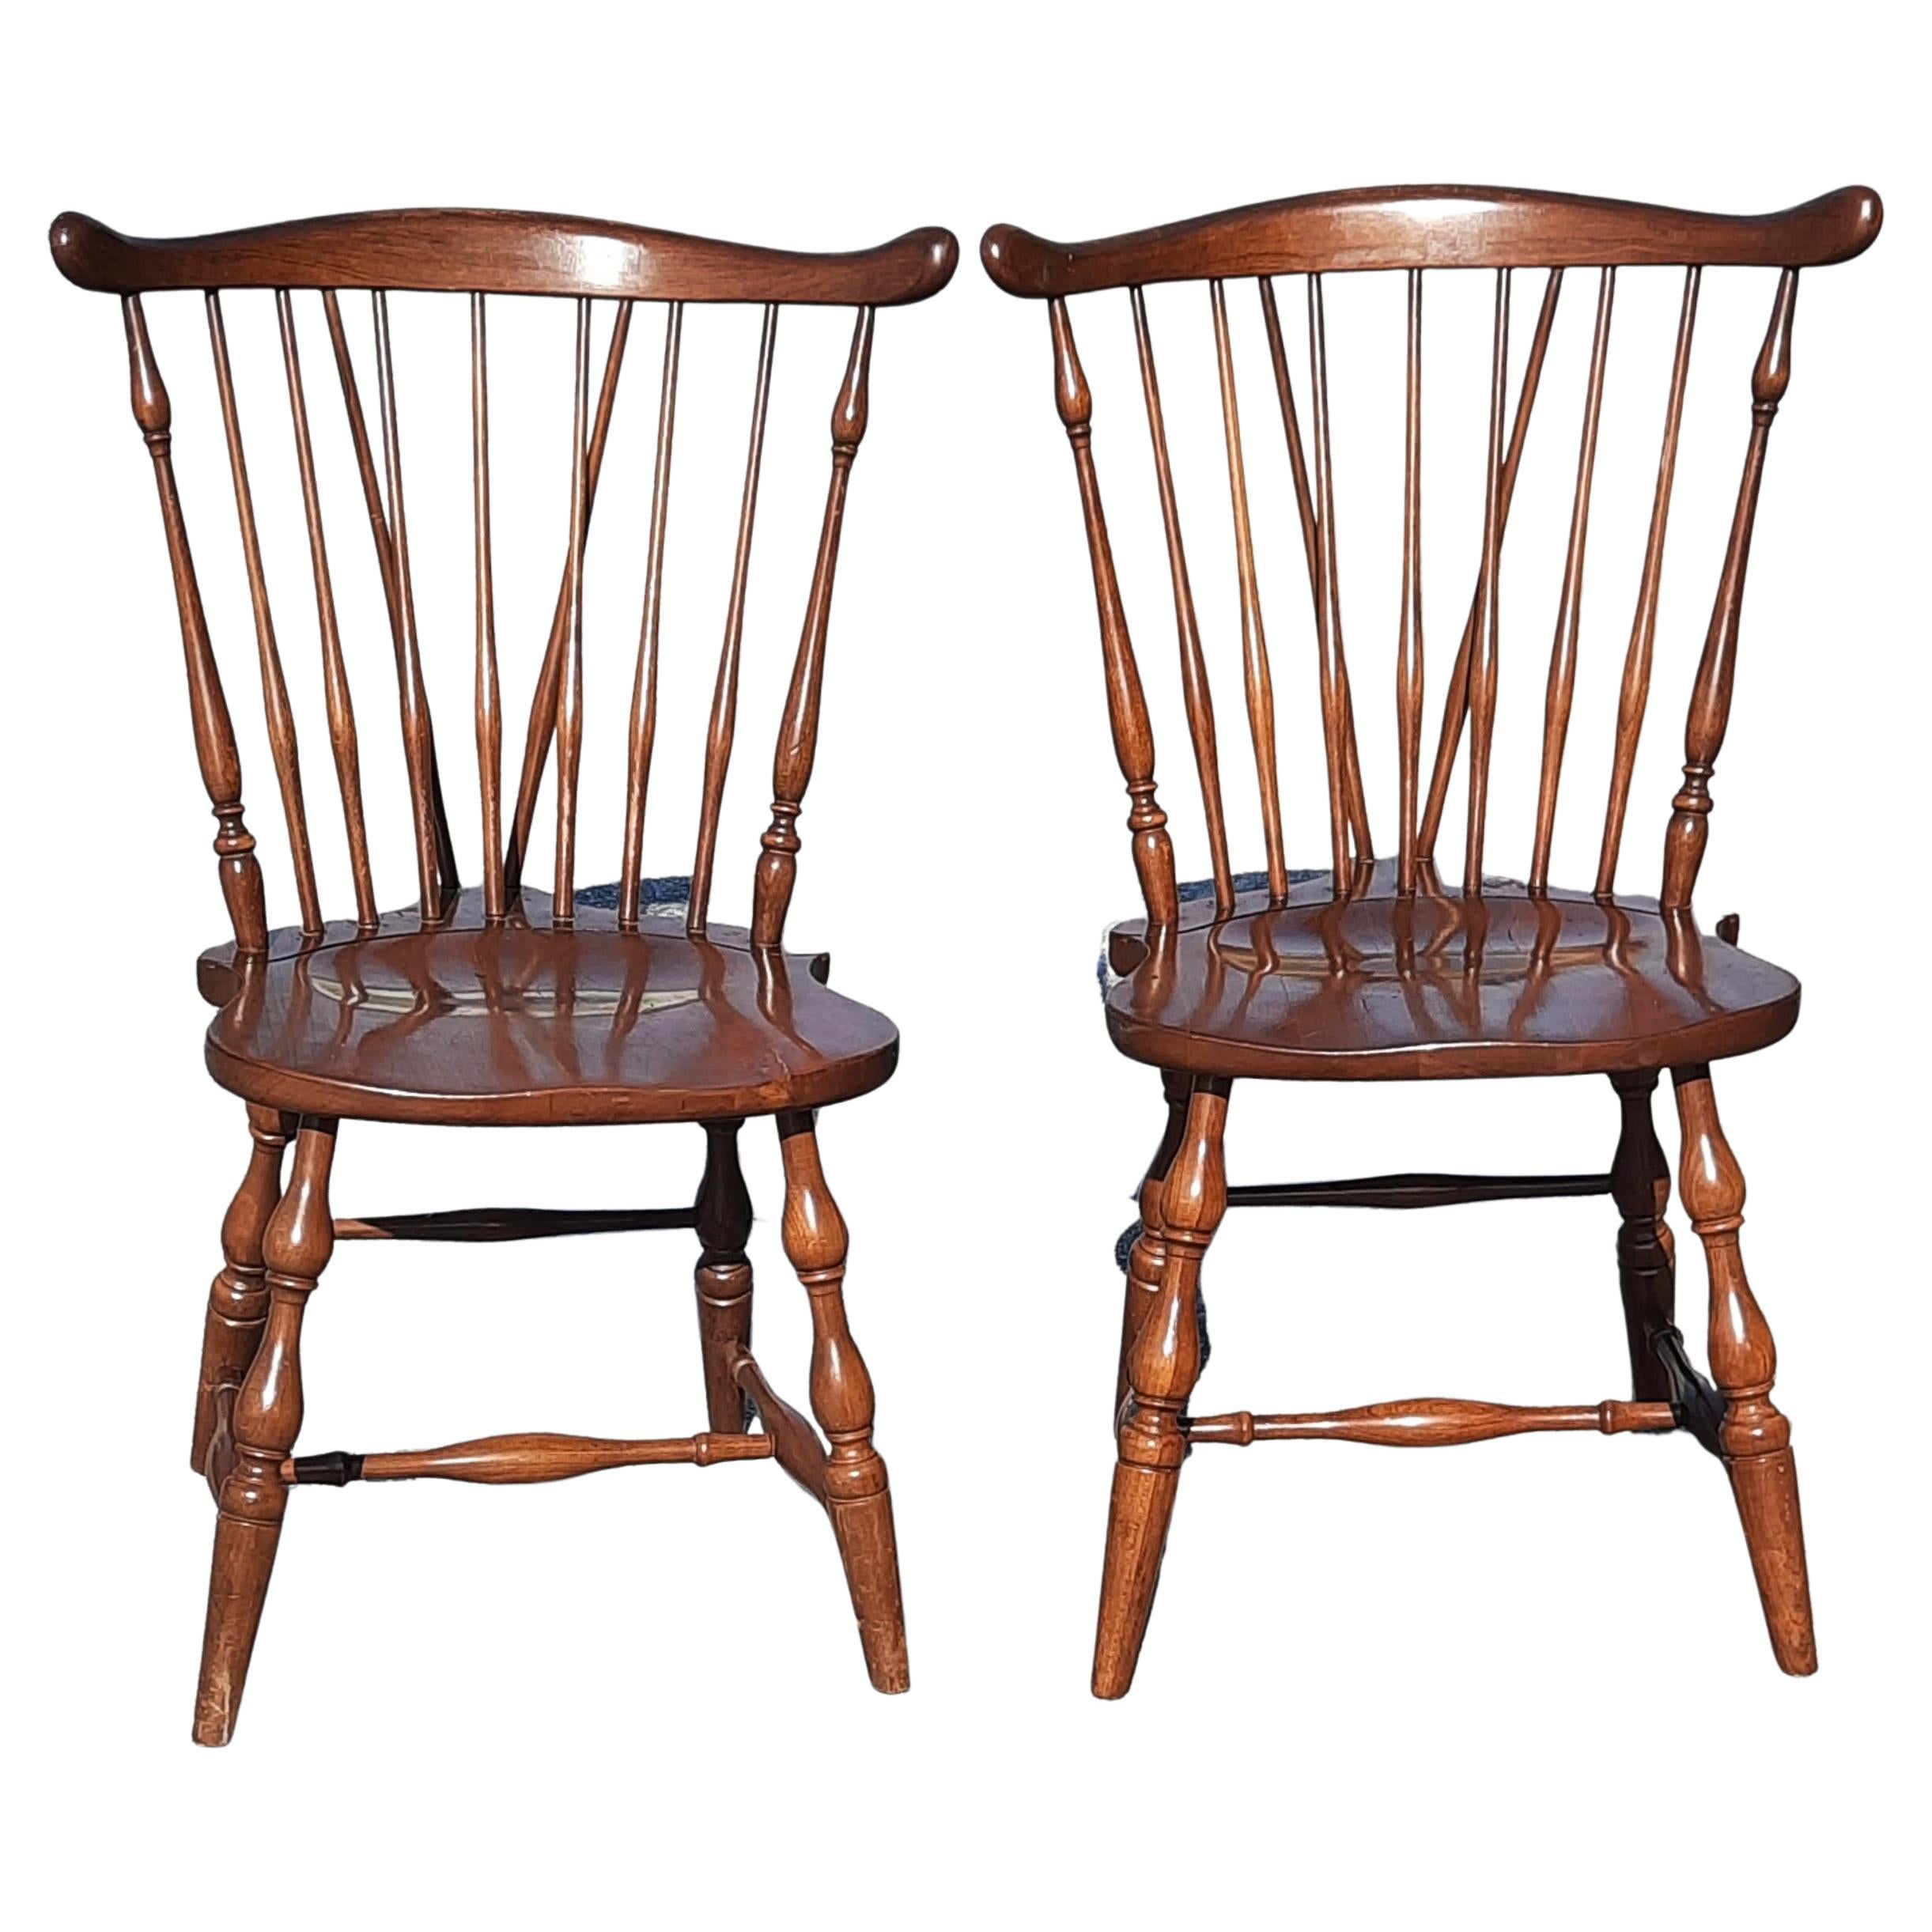 These are vintage Pennsylvania House Windsor Style Fiddleback Duxbury Solid cherry Dining Side Chairs. They are in good vintage condition with some wear appropriate with age and normal use. 

Measurements are 17.5